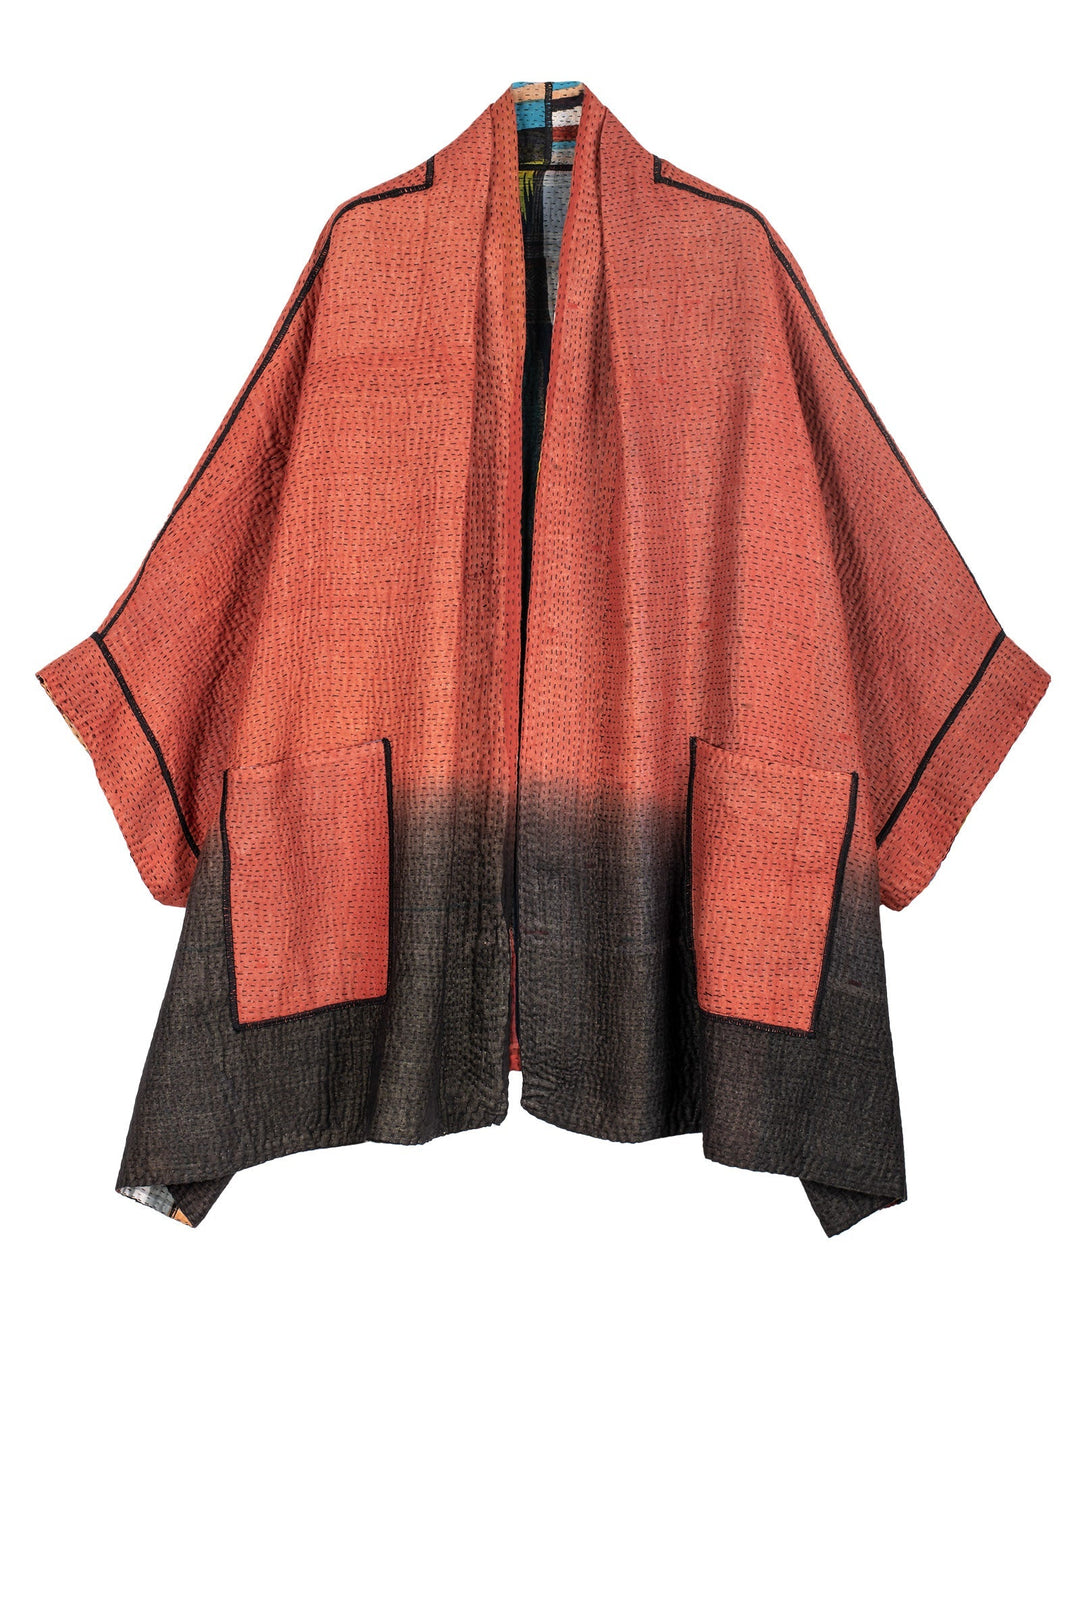 IKAT STRIPE KANTHA DOUBLE COLLAR PONCHO - is4323-red -